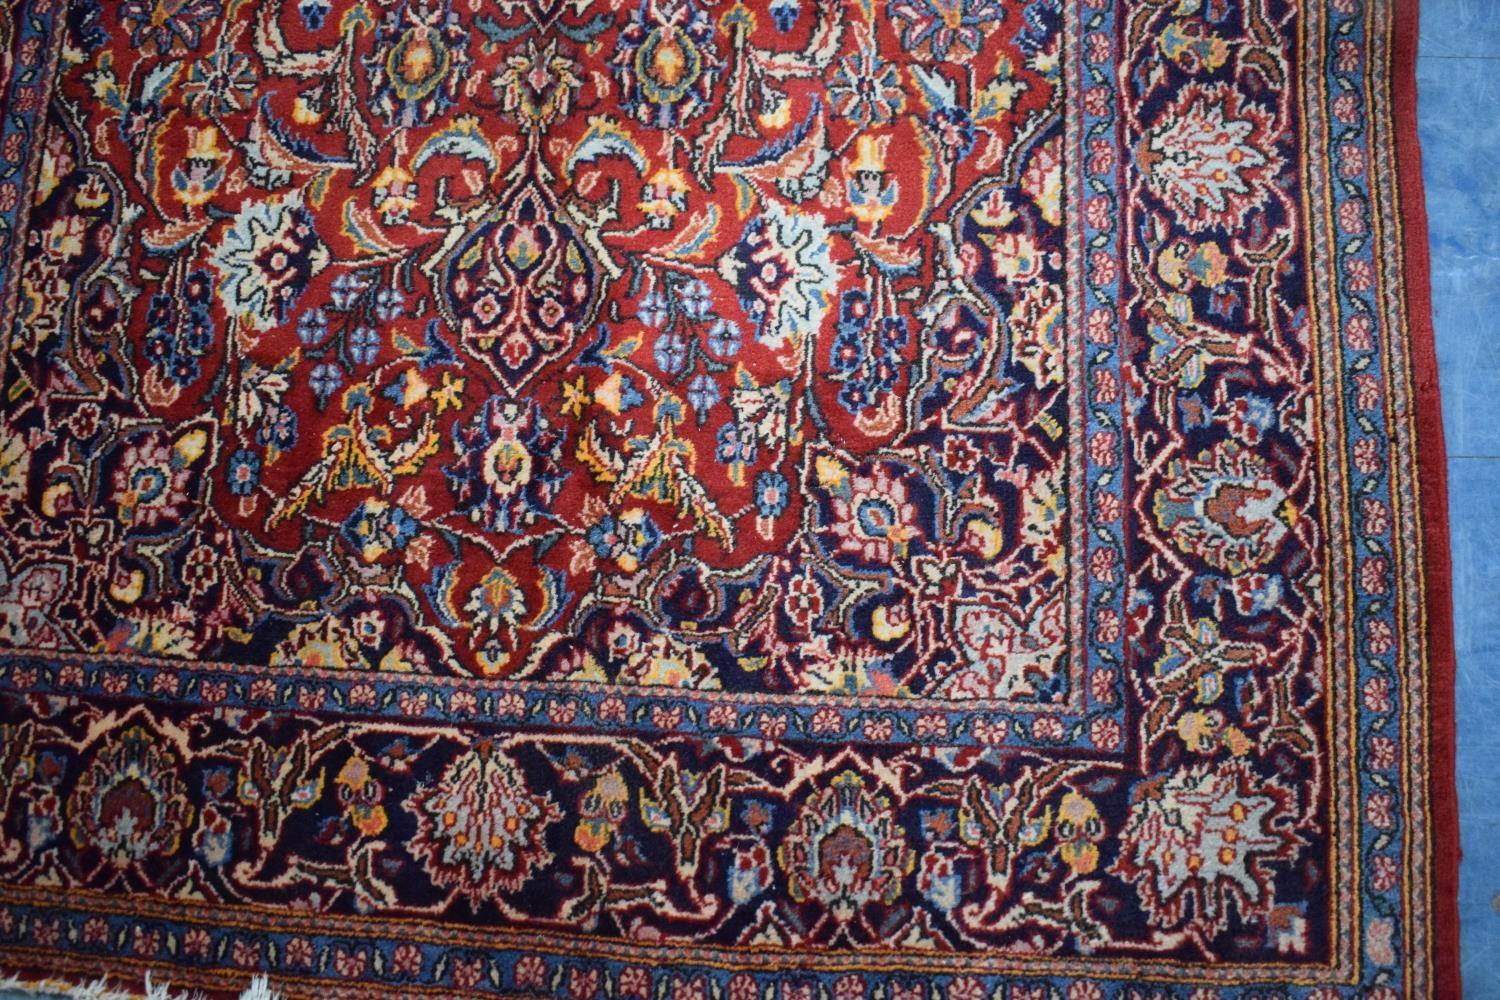 An Antique Persian Hand-Made Keshan Rug, 205 x 130cms - Image 2 of 5